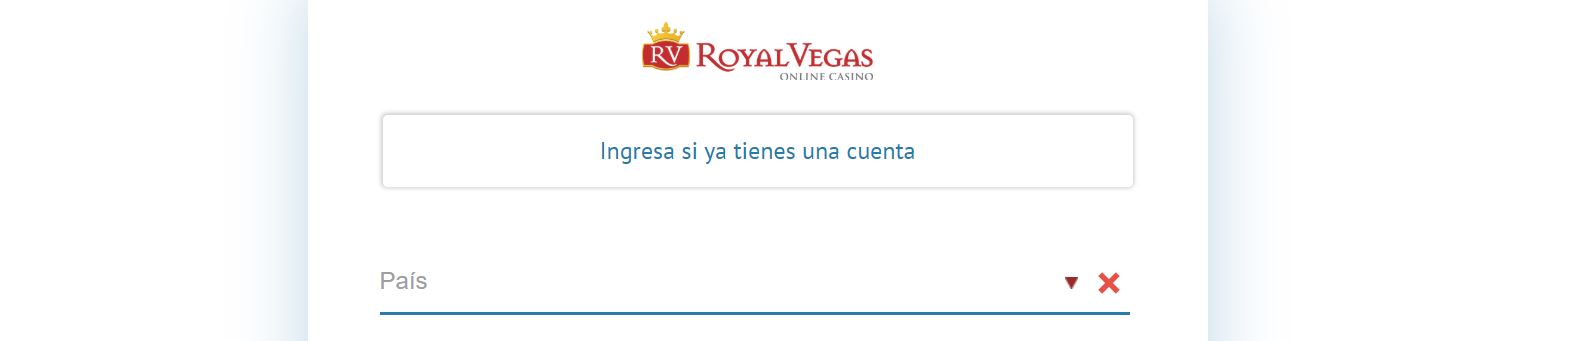 Registering at Royal Vegas casino is quick and easy.